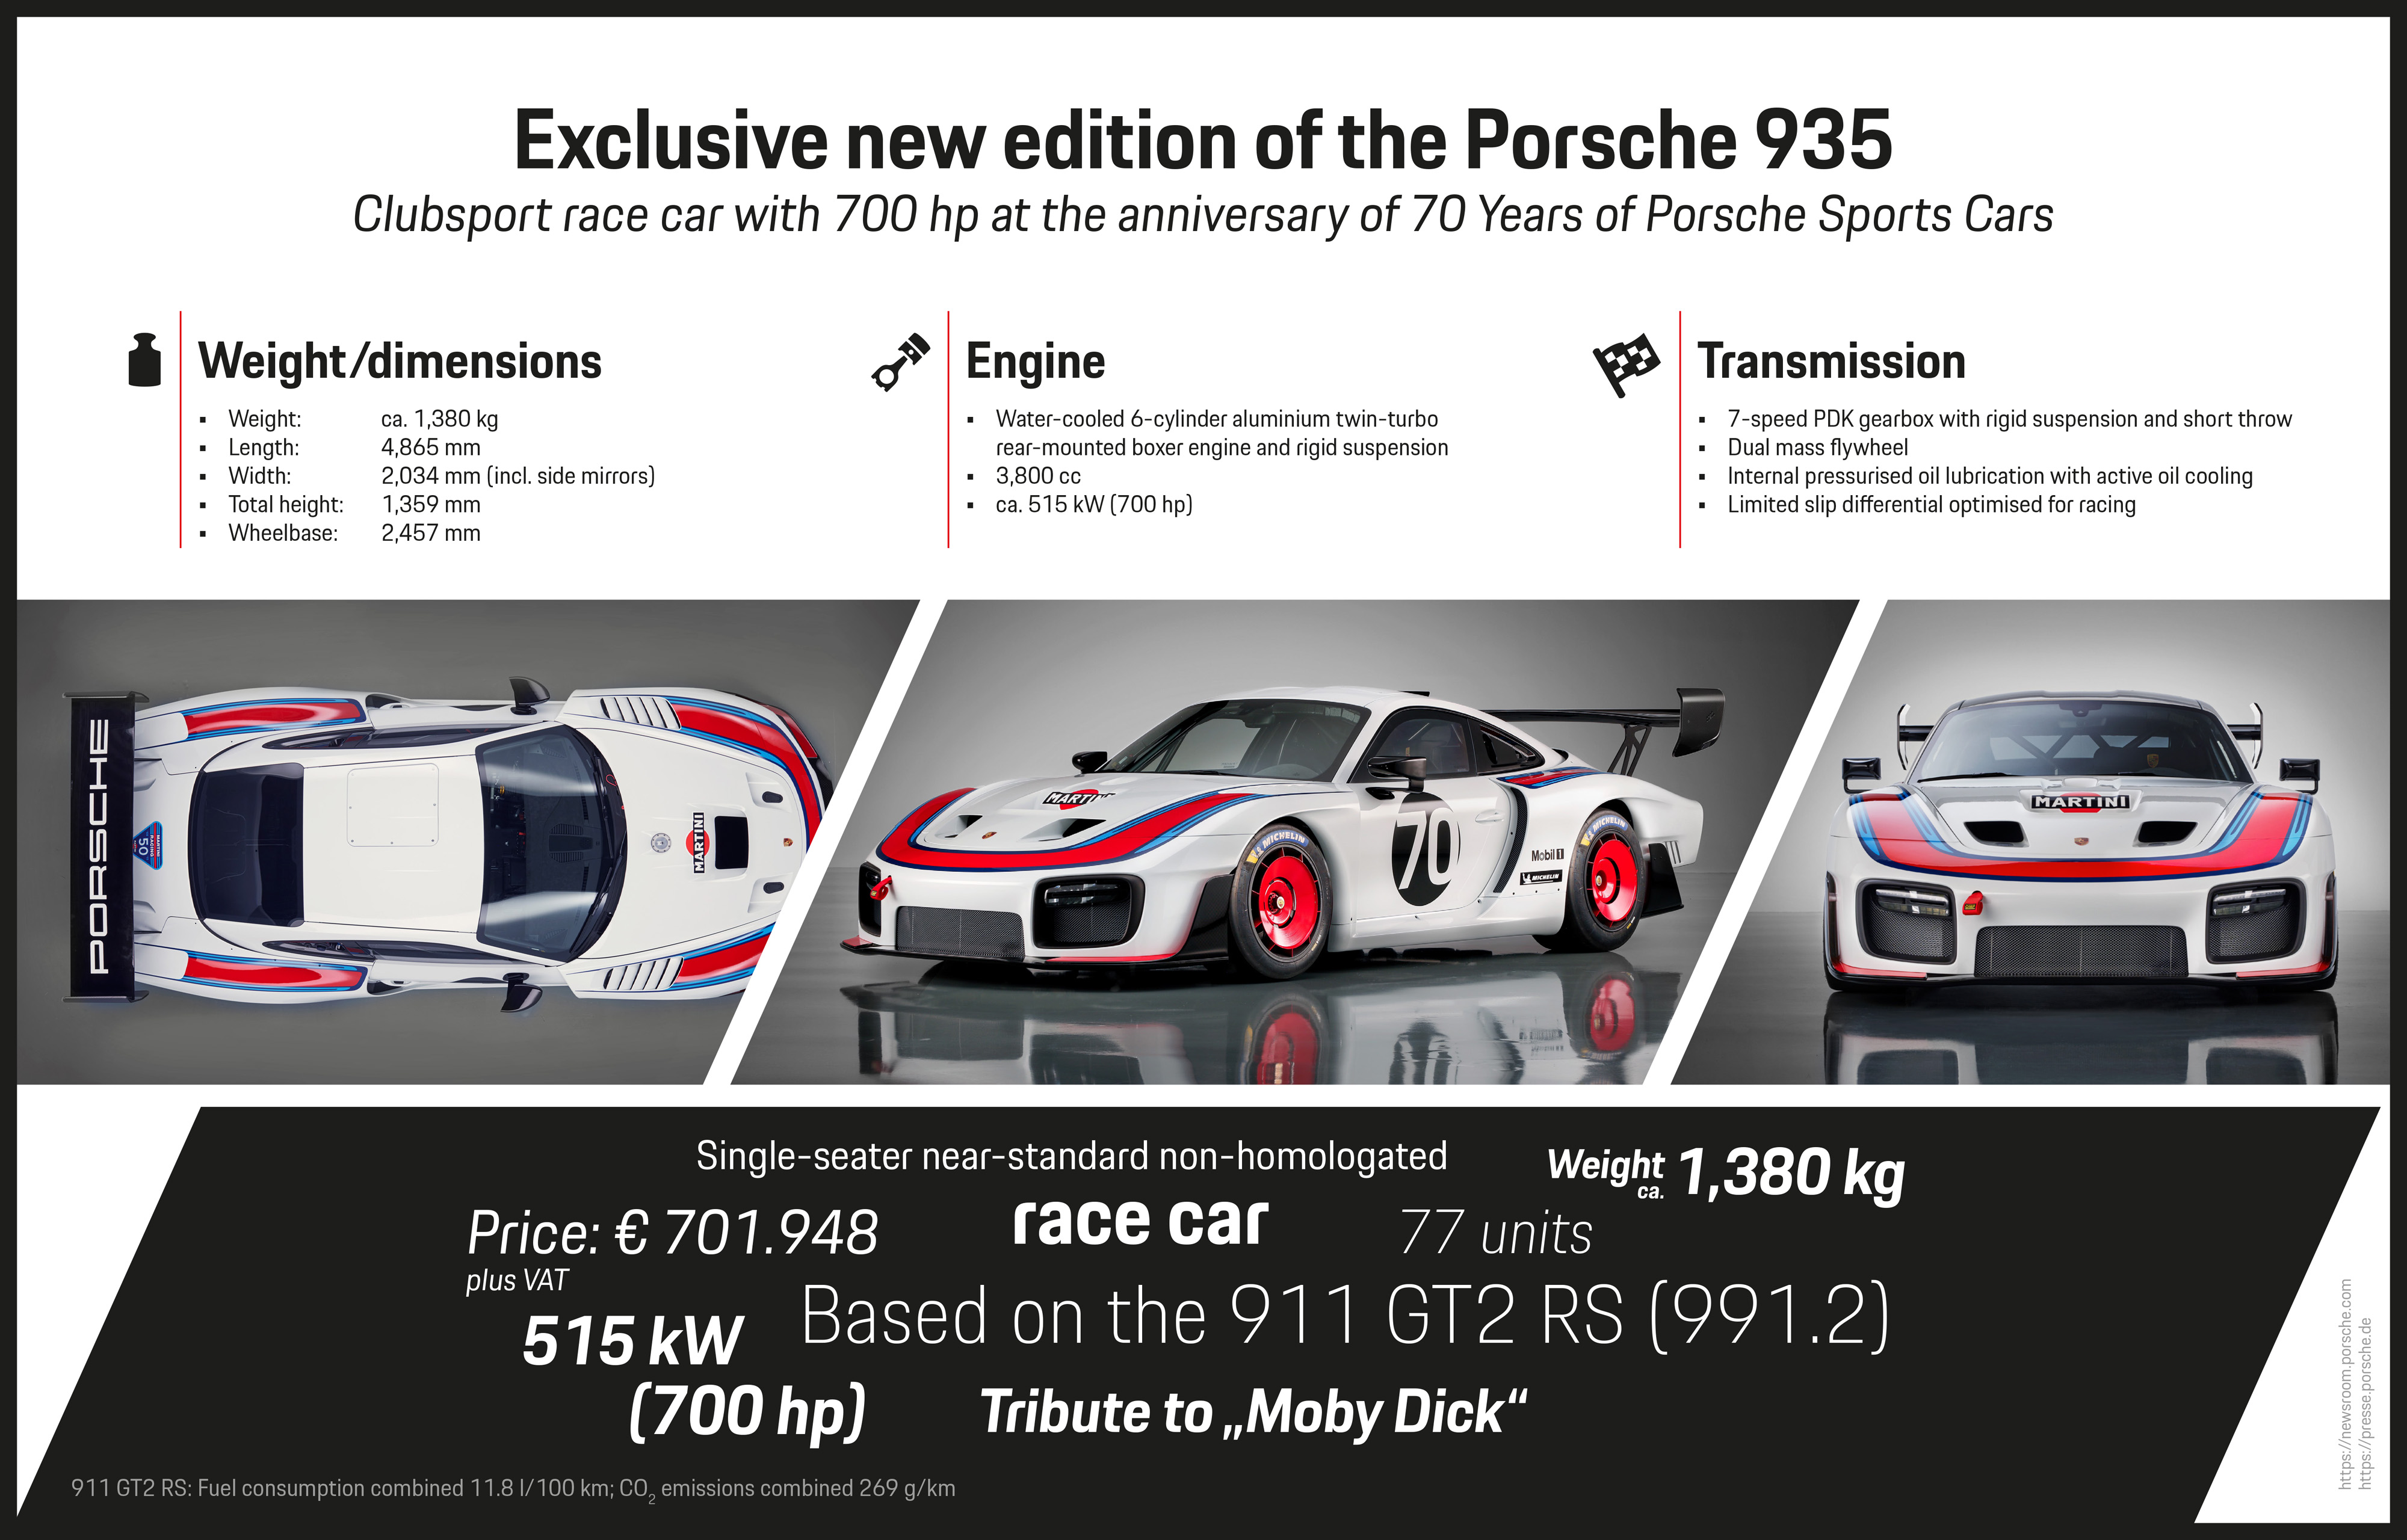 Exclusive new edition of the 935, info graphics, 2018, Porsche AG